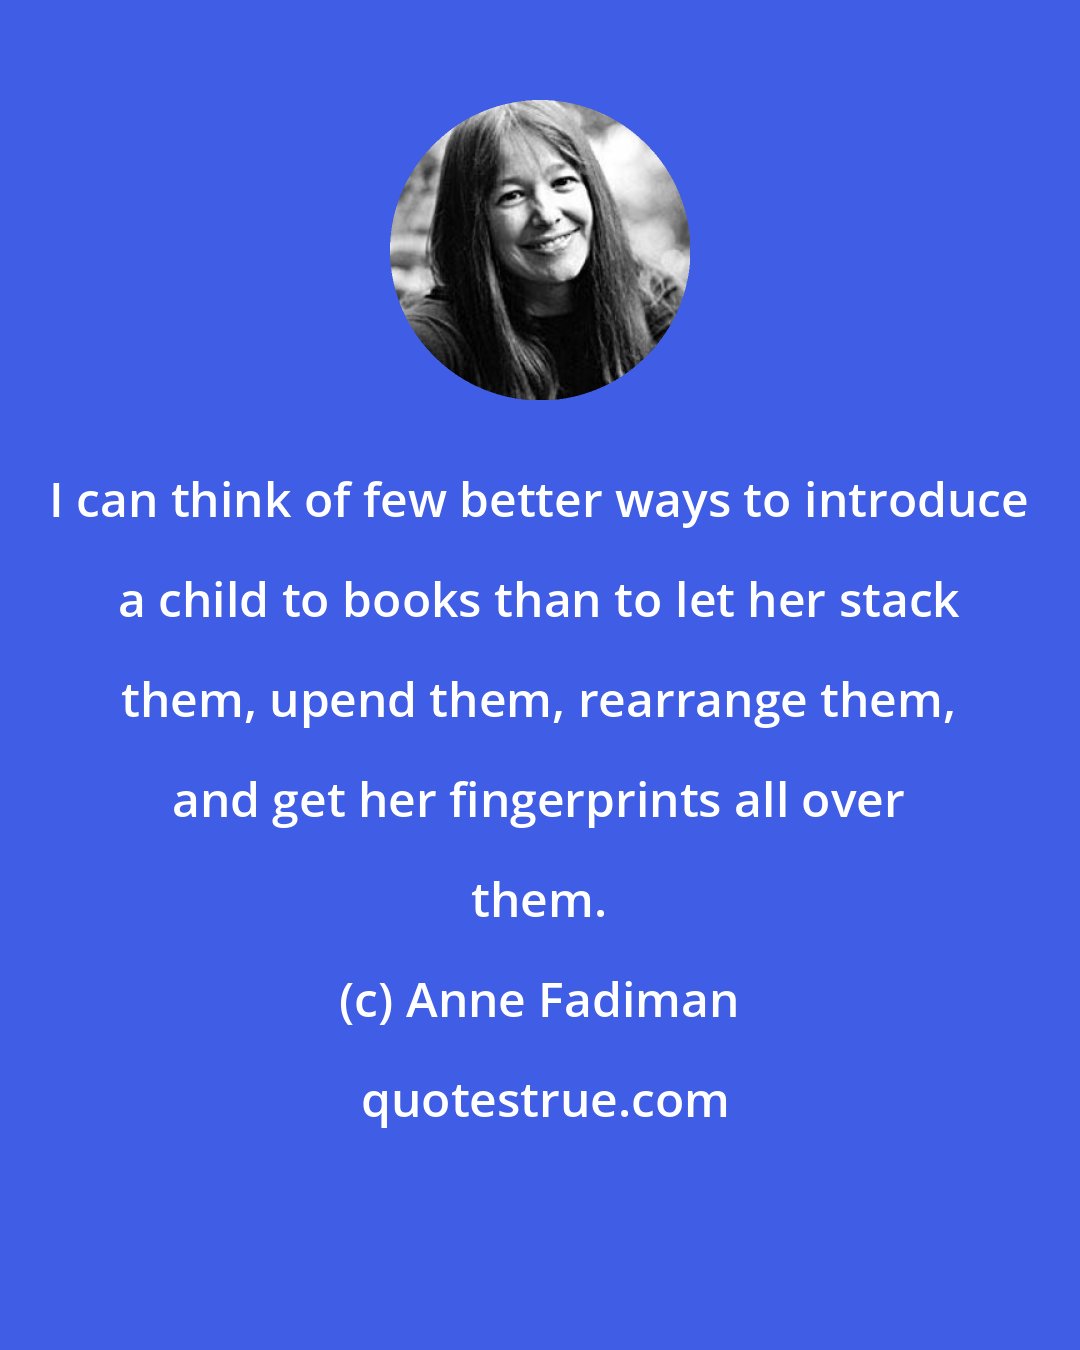 Anne Fadiman: I can think of few better ways to introduce a child to books than to let her stack them, upend them, rearrange them, and get her fingerprints all over them.